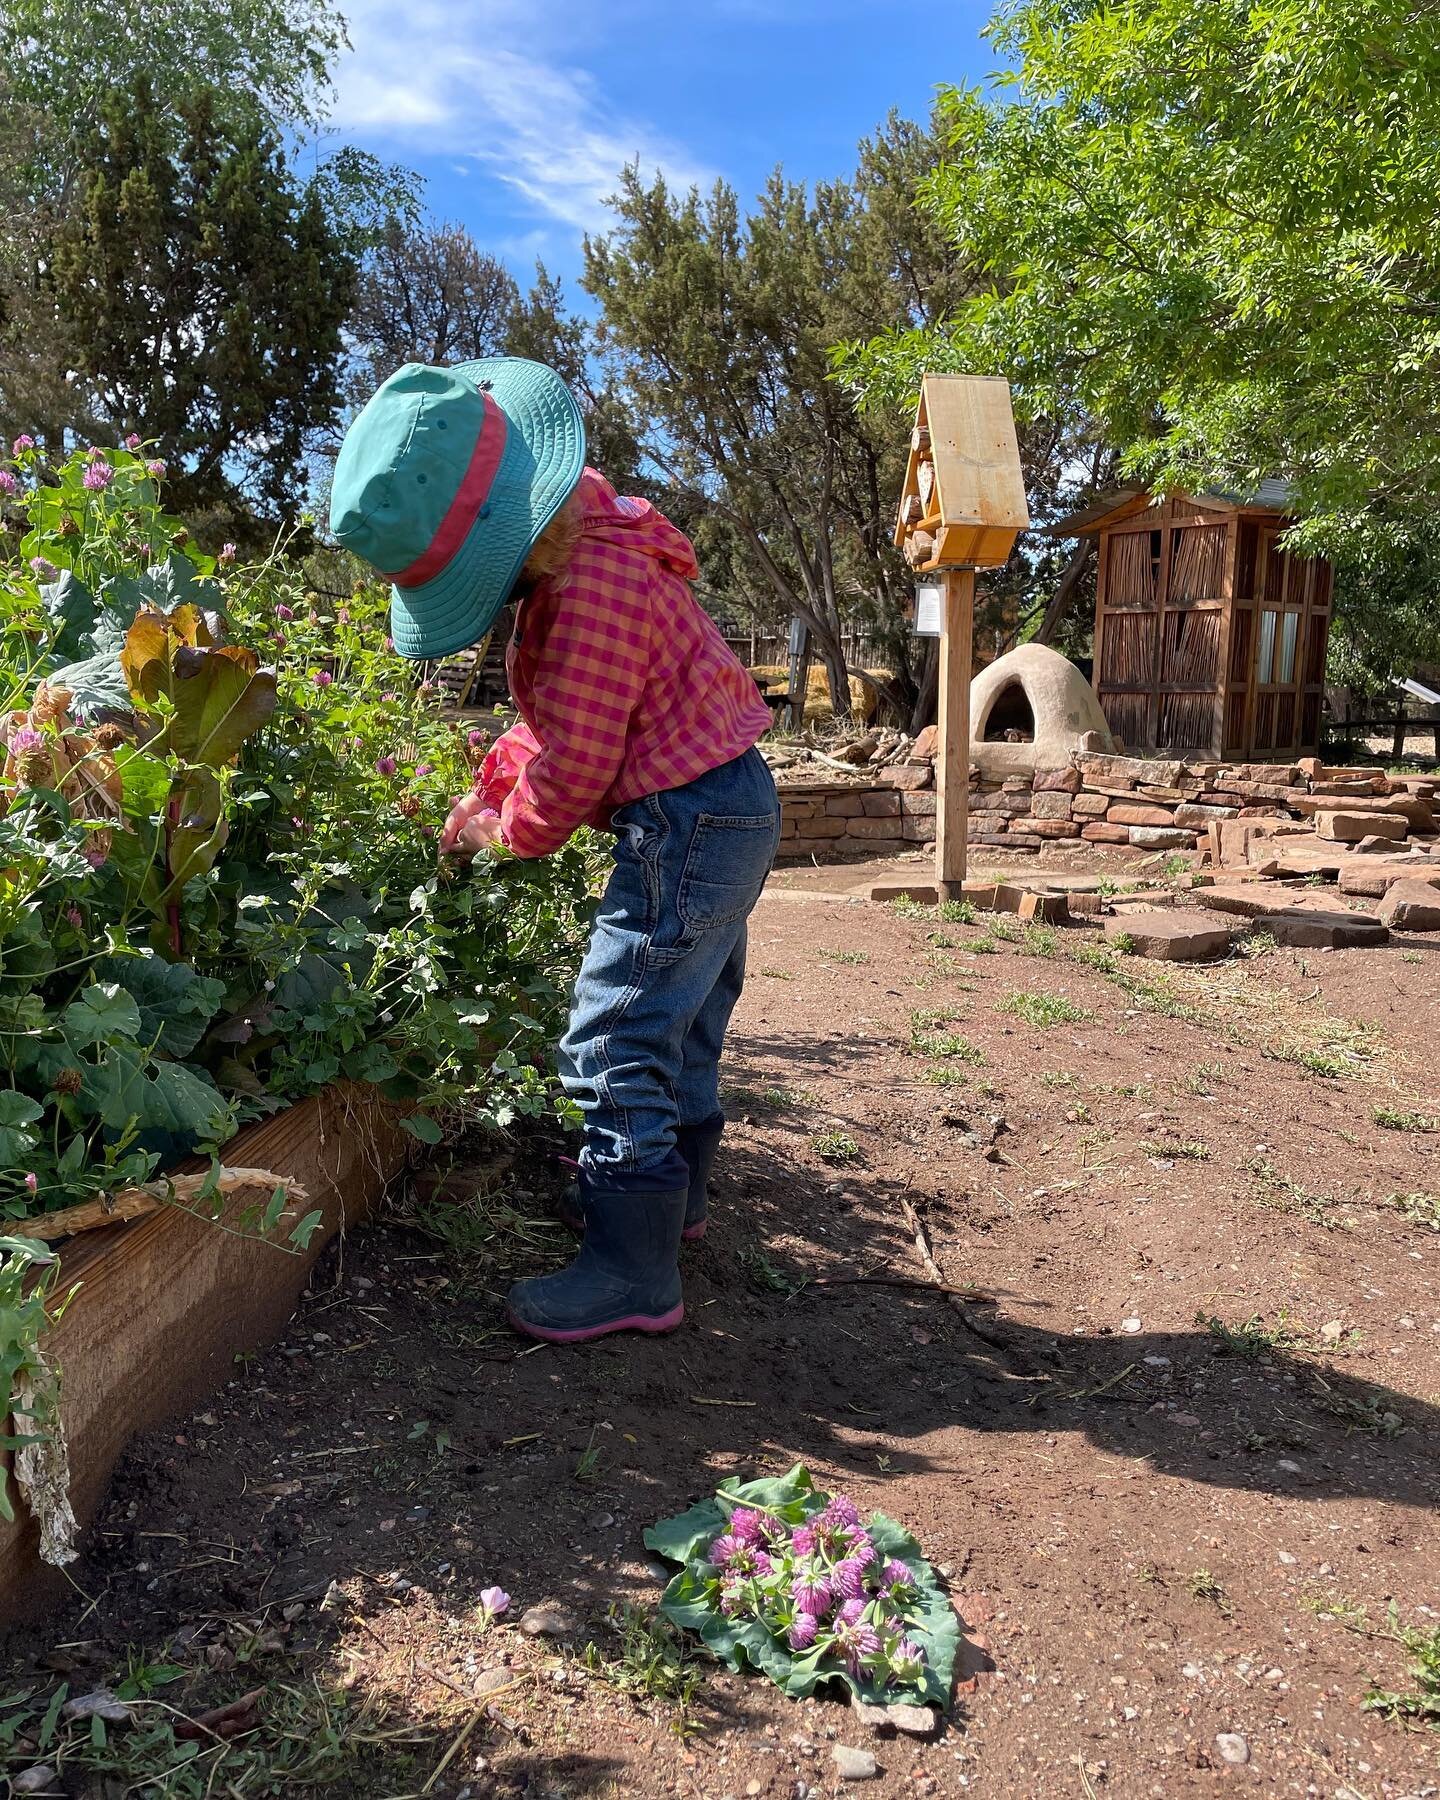 Our Dandelion program for 3-5 year old's is in full swing! The kids are playing in the garden, singing, dancing and exploring the outdoors.  So fun to see these little ones walking and climbing all over our campus.

#santafewaldorfschool #waldorfeduc